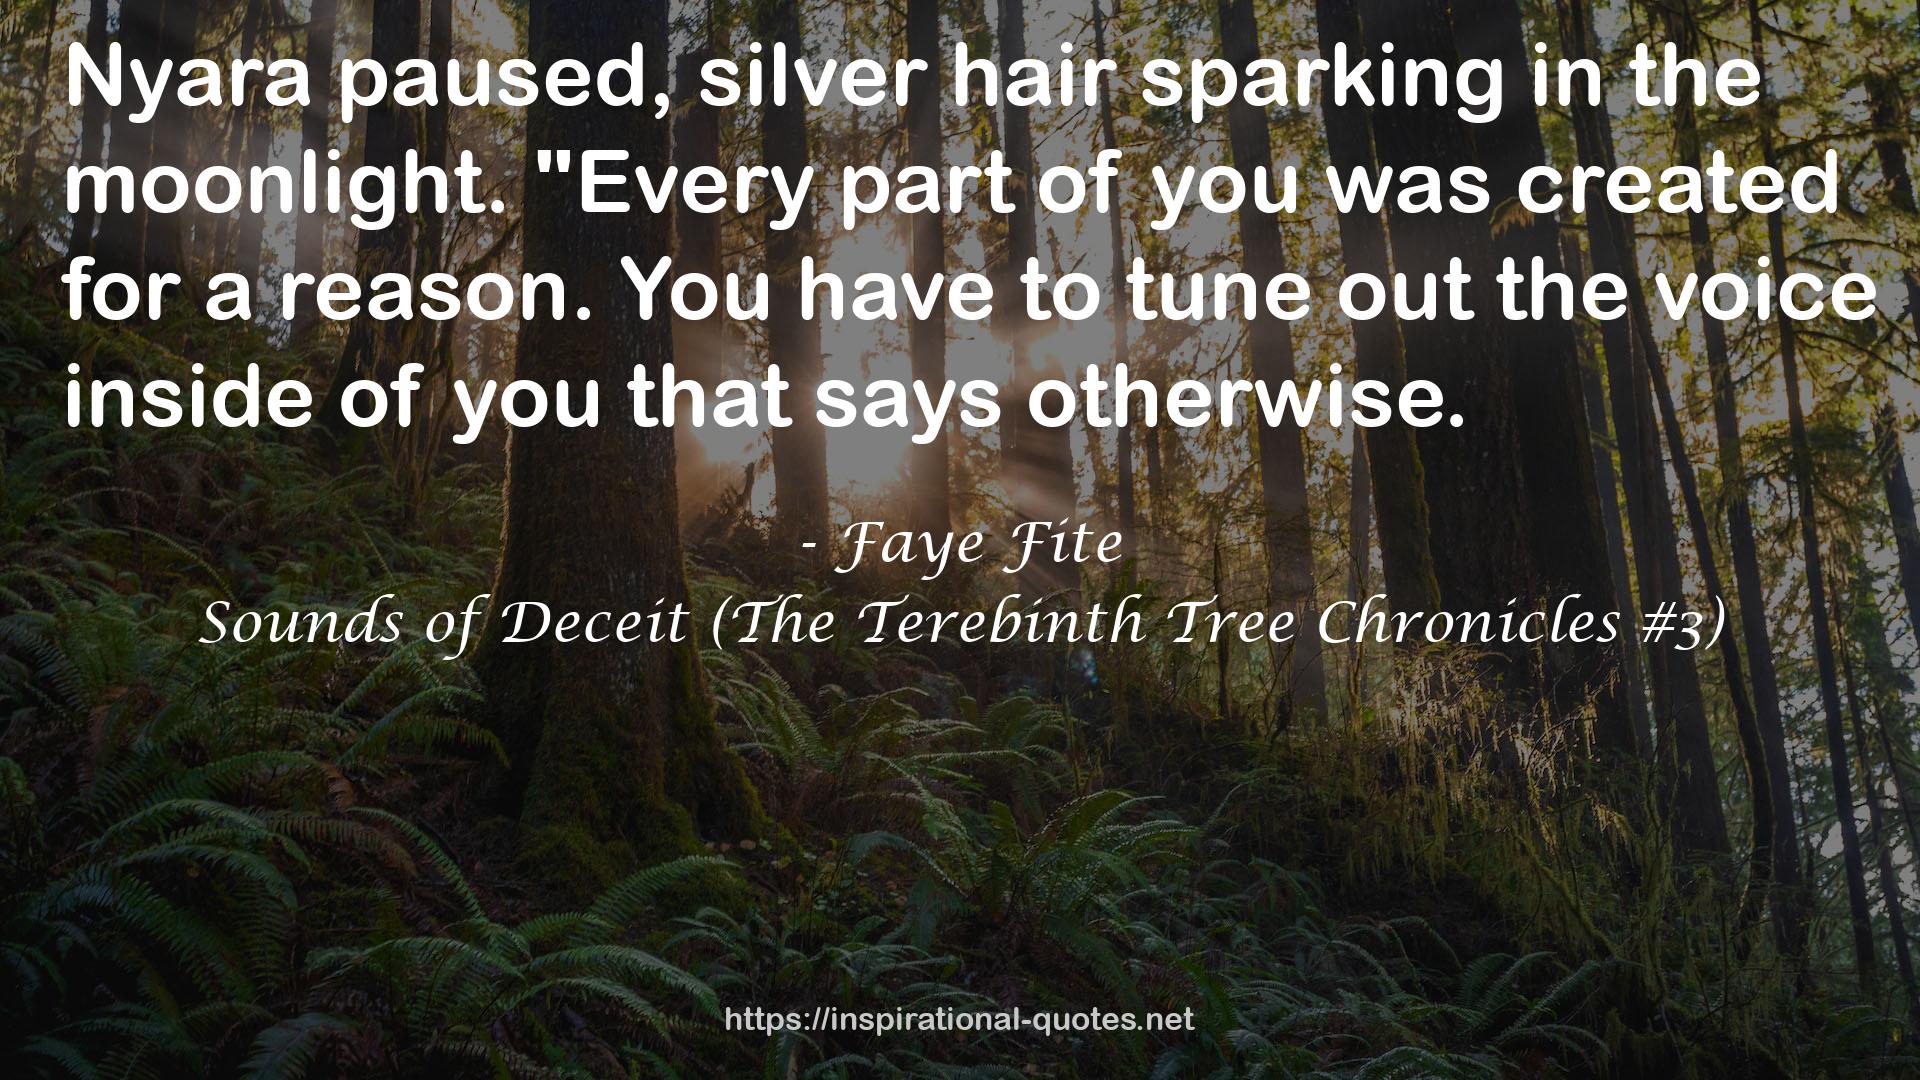 Sounds of Deceit (The Terebinth Tree Chronicles #3) QUOTES